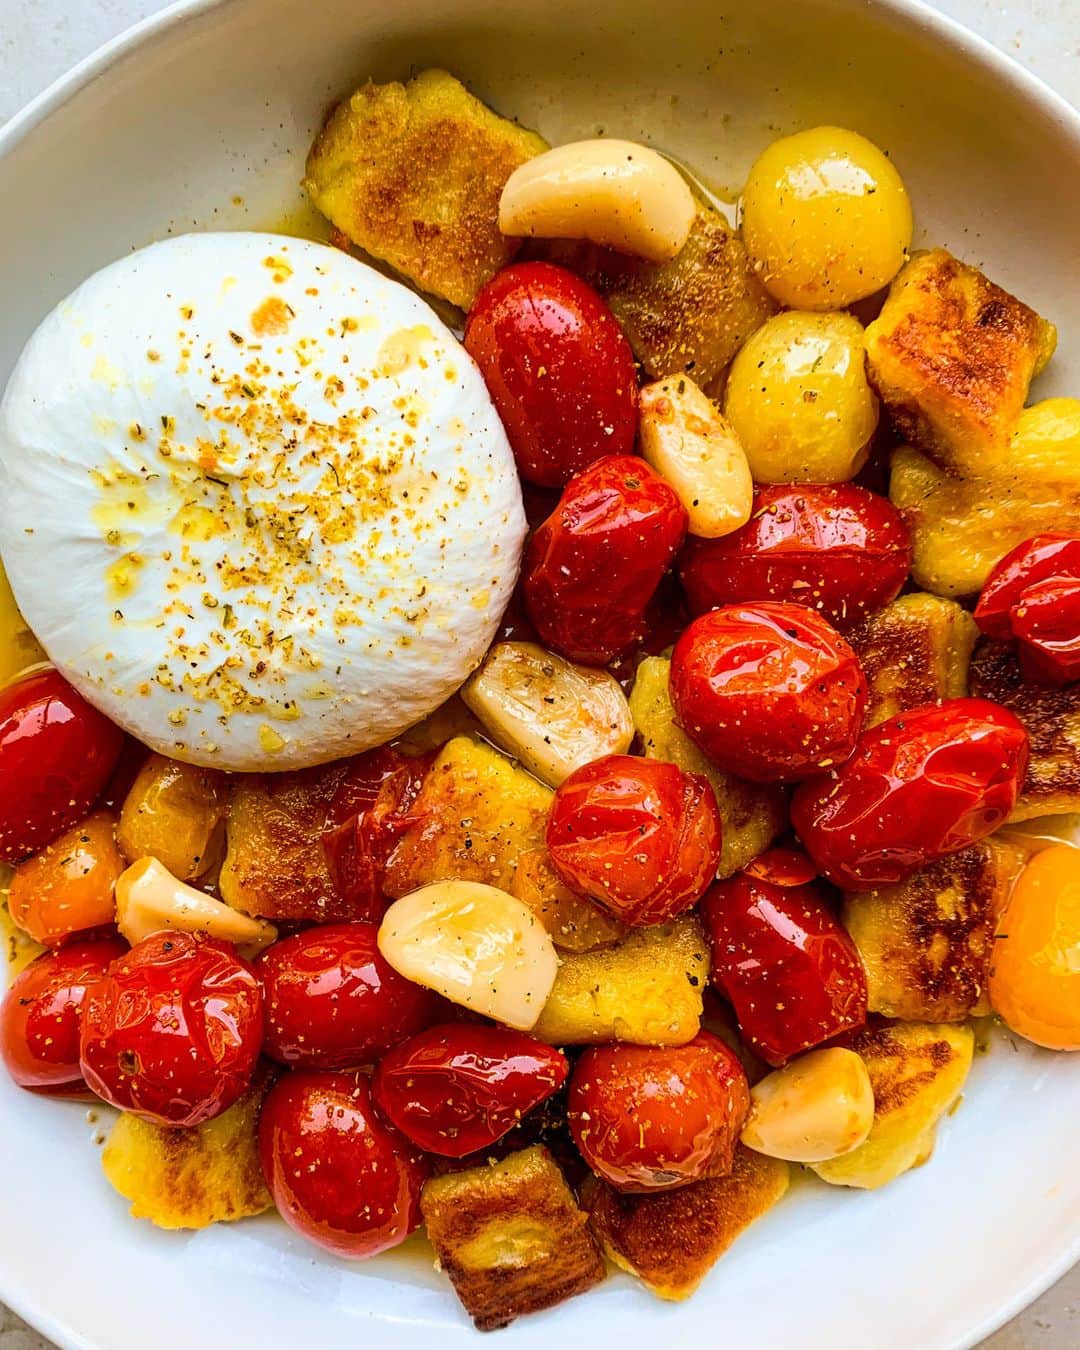 Food52のインスタグラム：「"If you're looking for a no-hassle summer snack or antipasto, this pan-fried gnocchi pairs perfectly with creamy burrata and melt-in-your-mouth tomato and garlic confit." Grab @pastasocialclub's recipe linked in our bio! #f52community #f52grams」